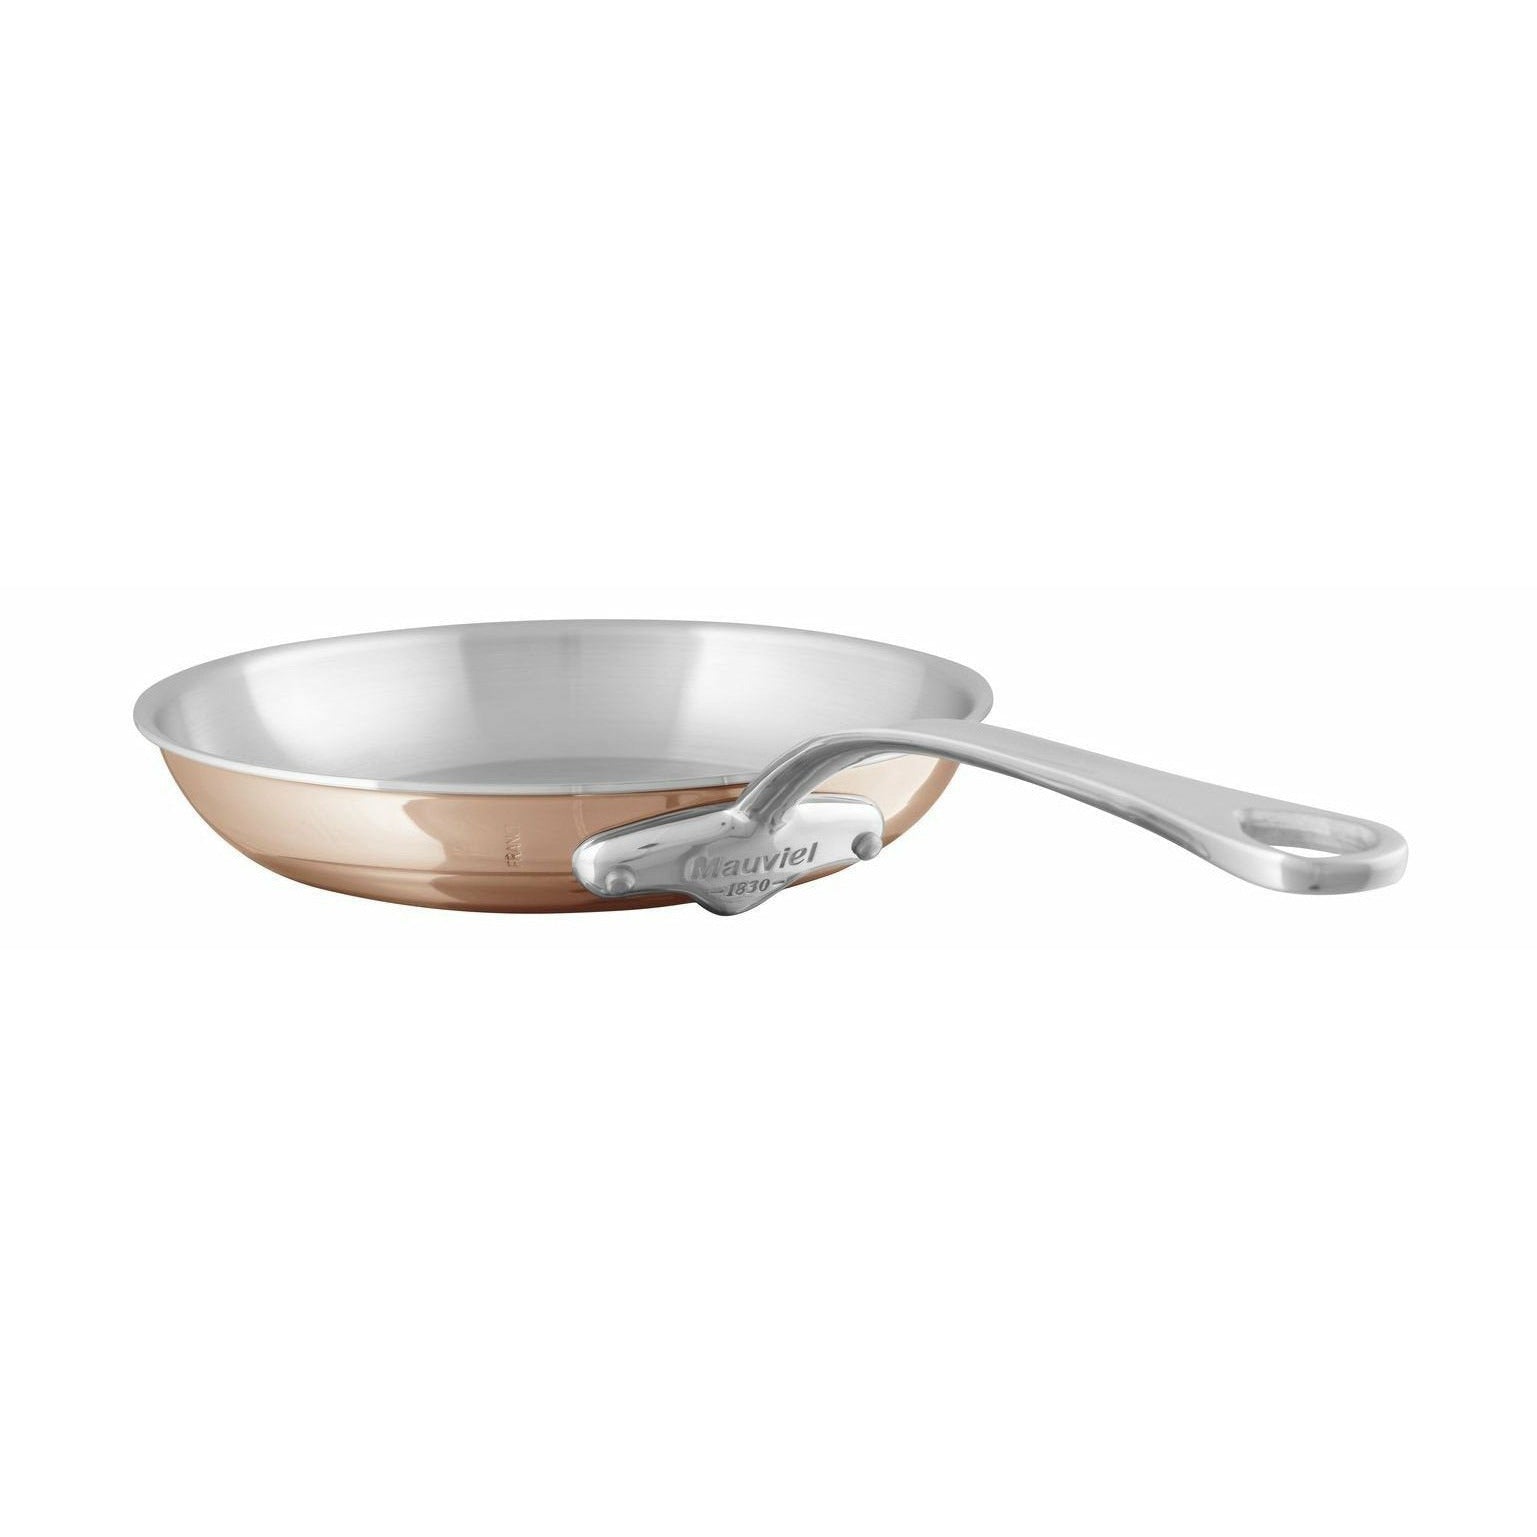 Mauviel M "6s Frying Freying Copper/Acero inoxidable, Ø 30 cm